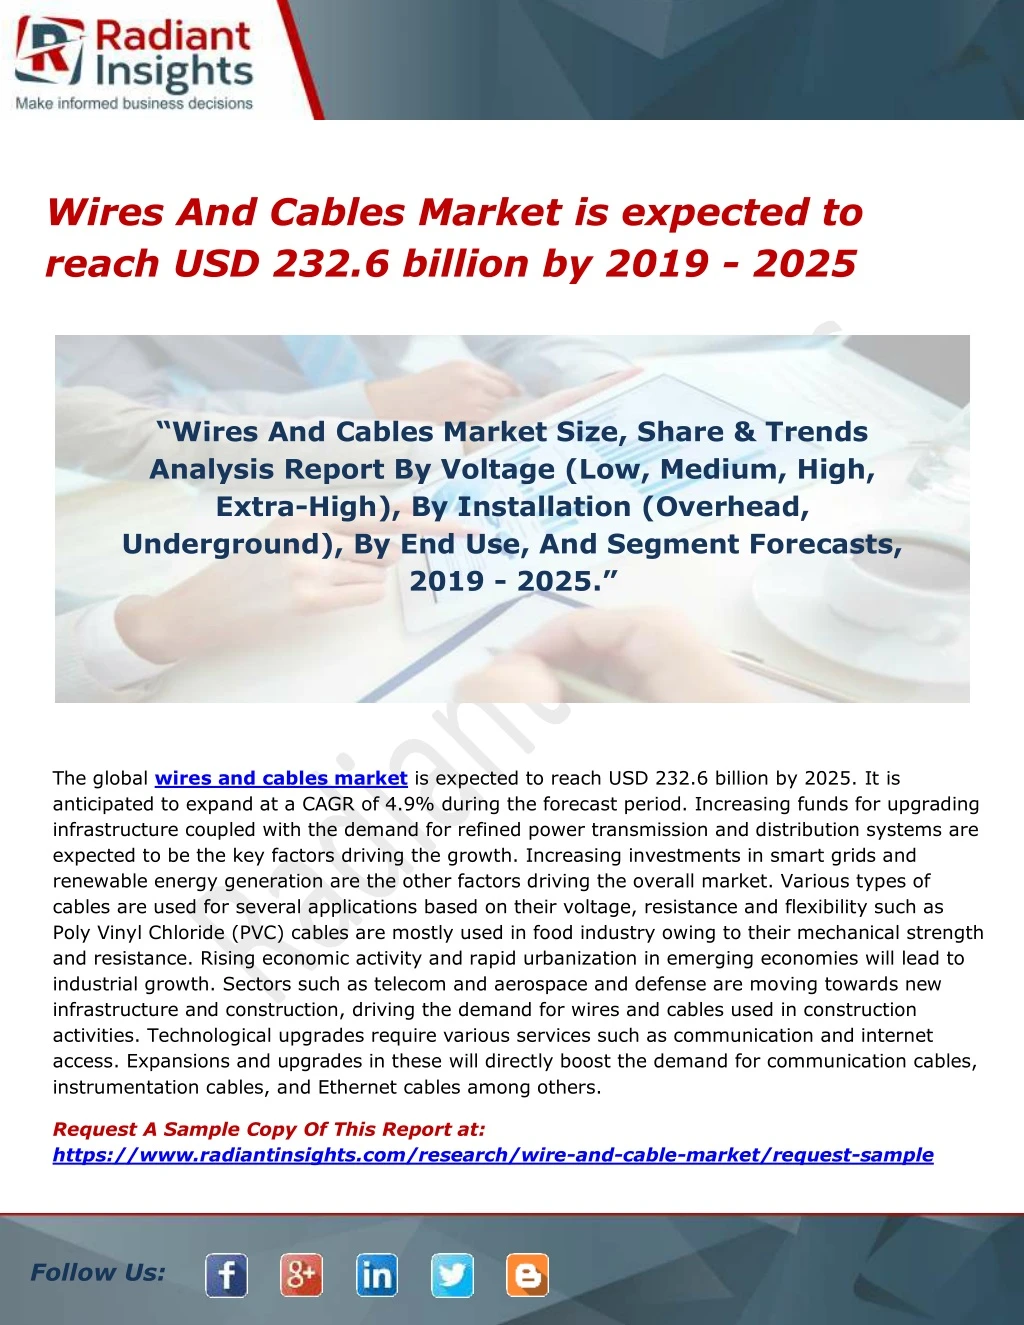 wires and cables market is expected to reach